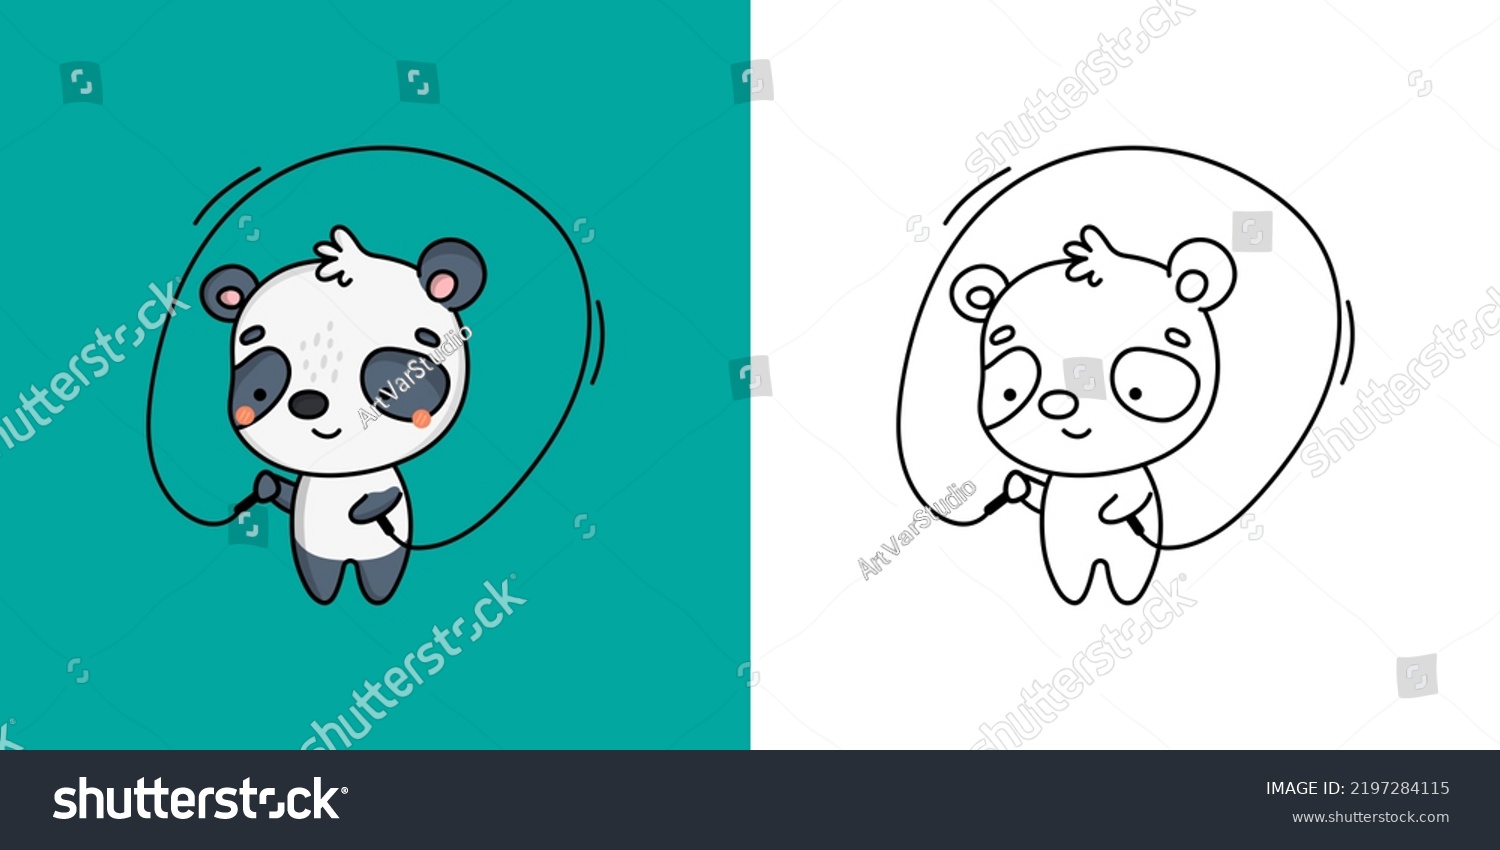 SVG of Cute Clipart Panda Sportsman Illustration and For Coloring Page. Cartoon Panda Bear Sportsman. Vector Illustration of a Kawaii Animal for Stickers, Baby Shower, Coloring Pages. svg